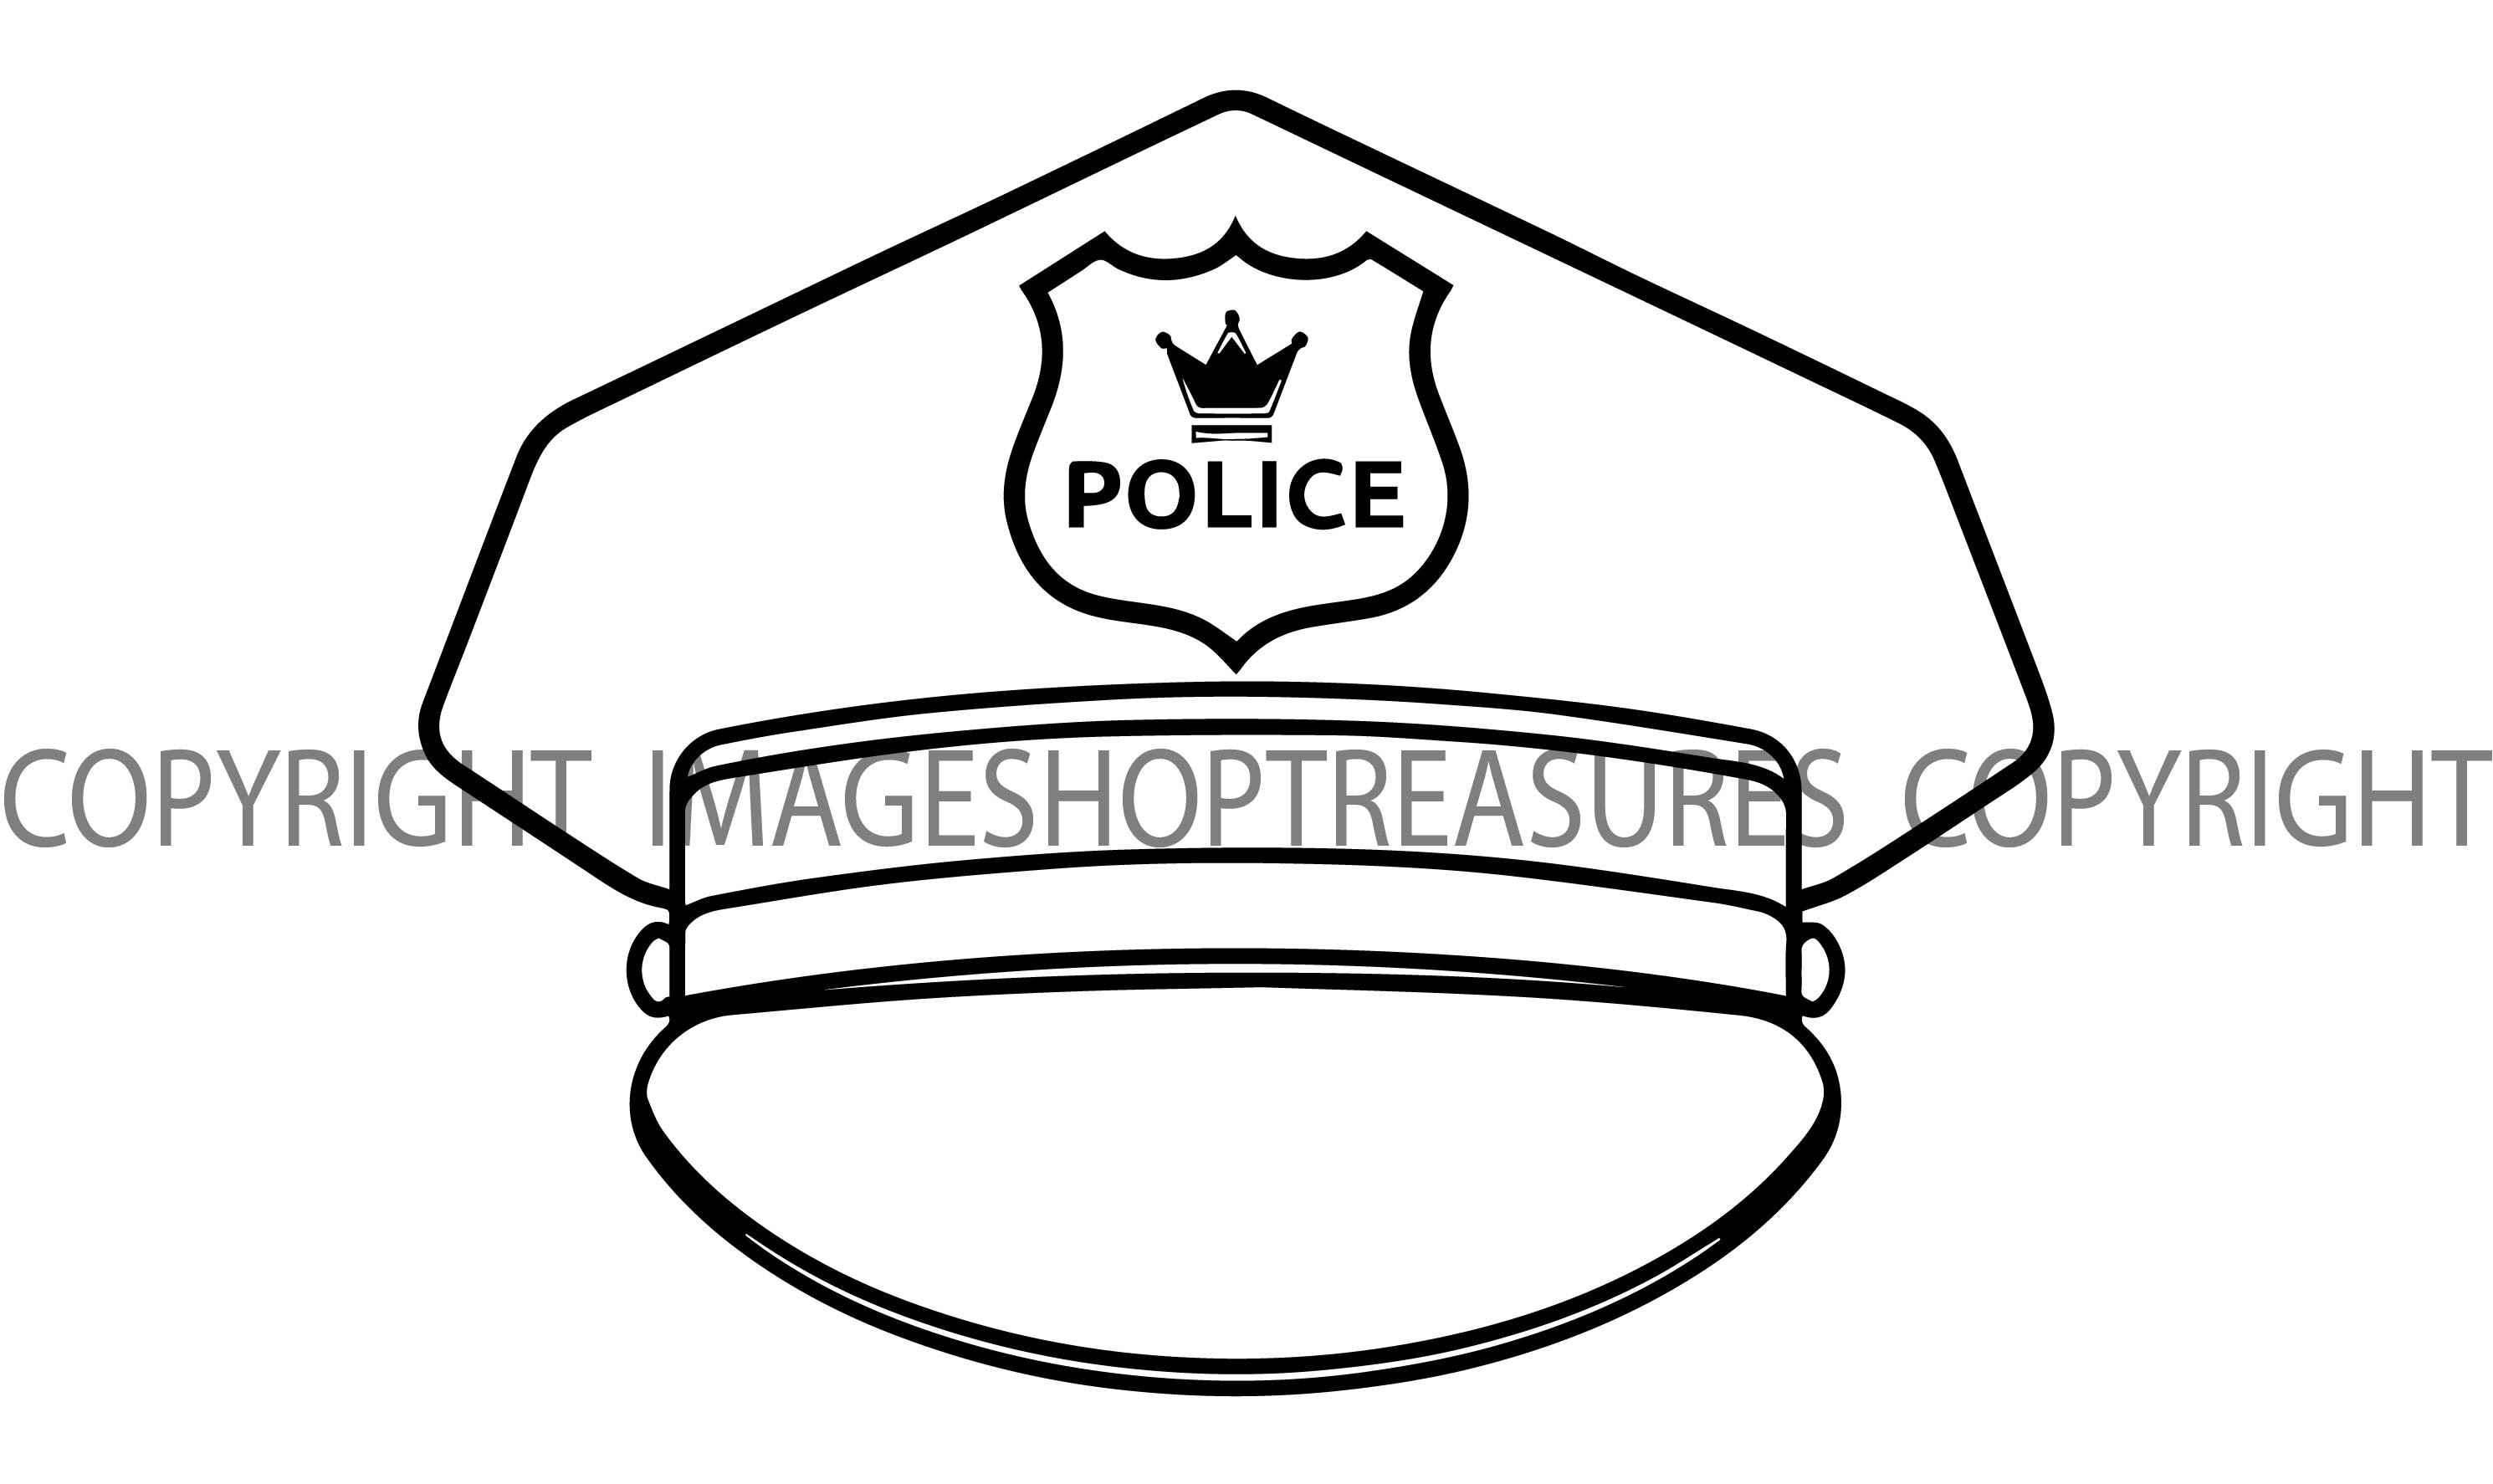 Police officer peaked hat head gear correctional sheriff fraternal cop policeman vector jpeg eps png svg clip art symbol circuit cutting